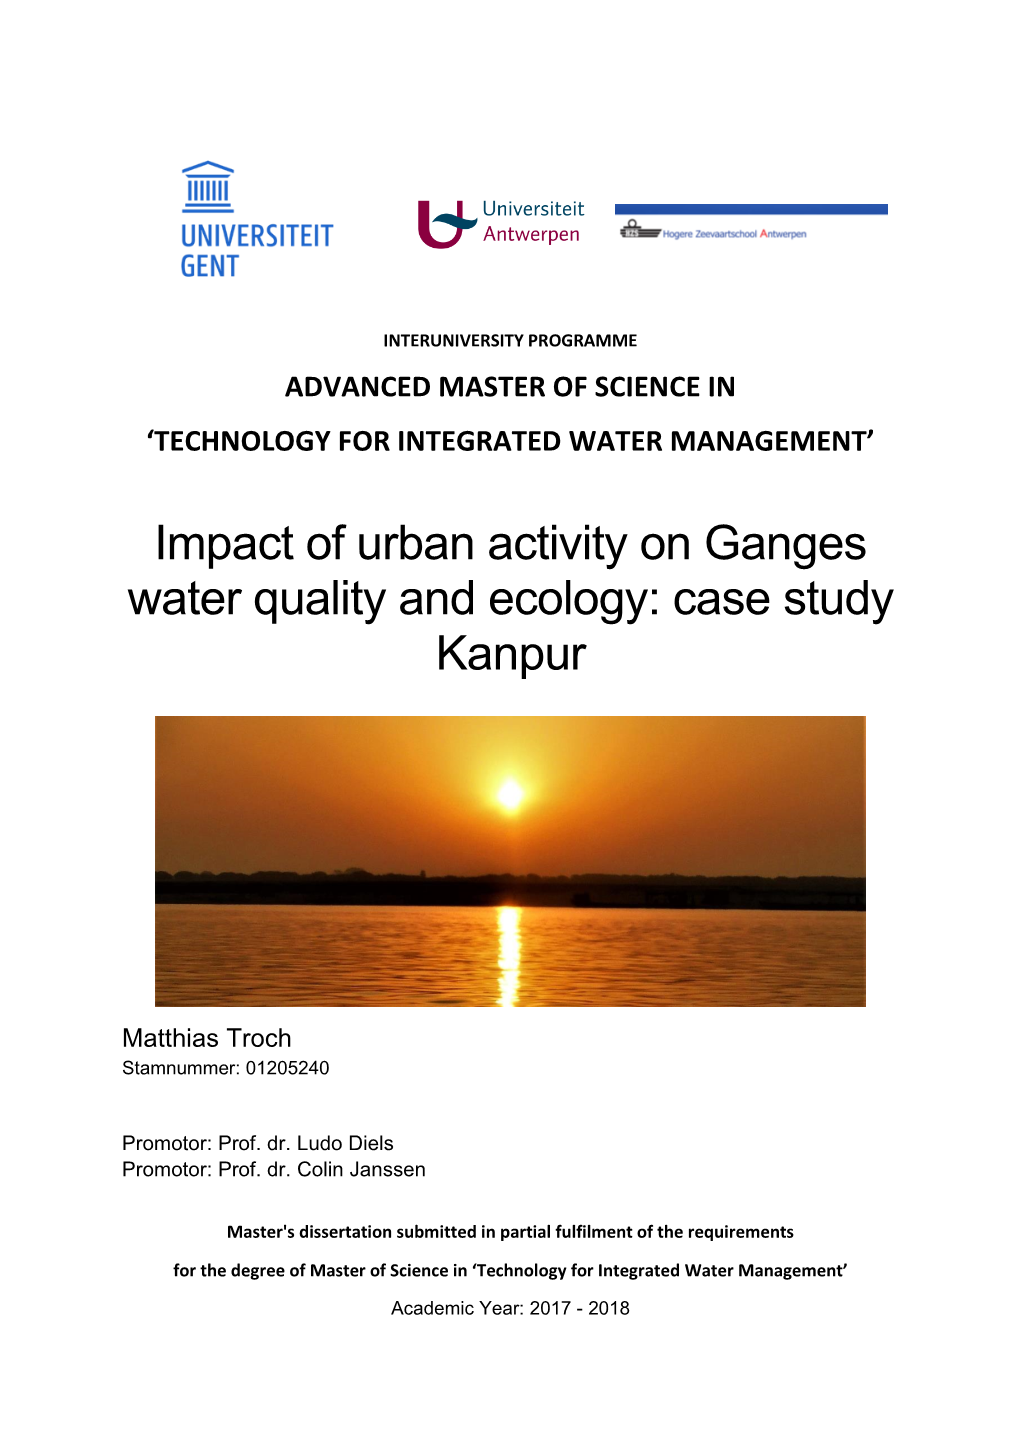 Impact of Urban Activity on Ganges Water Quality and Ecology: Case Study Kanpur